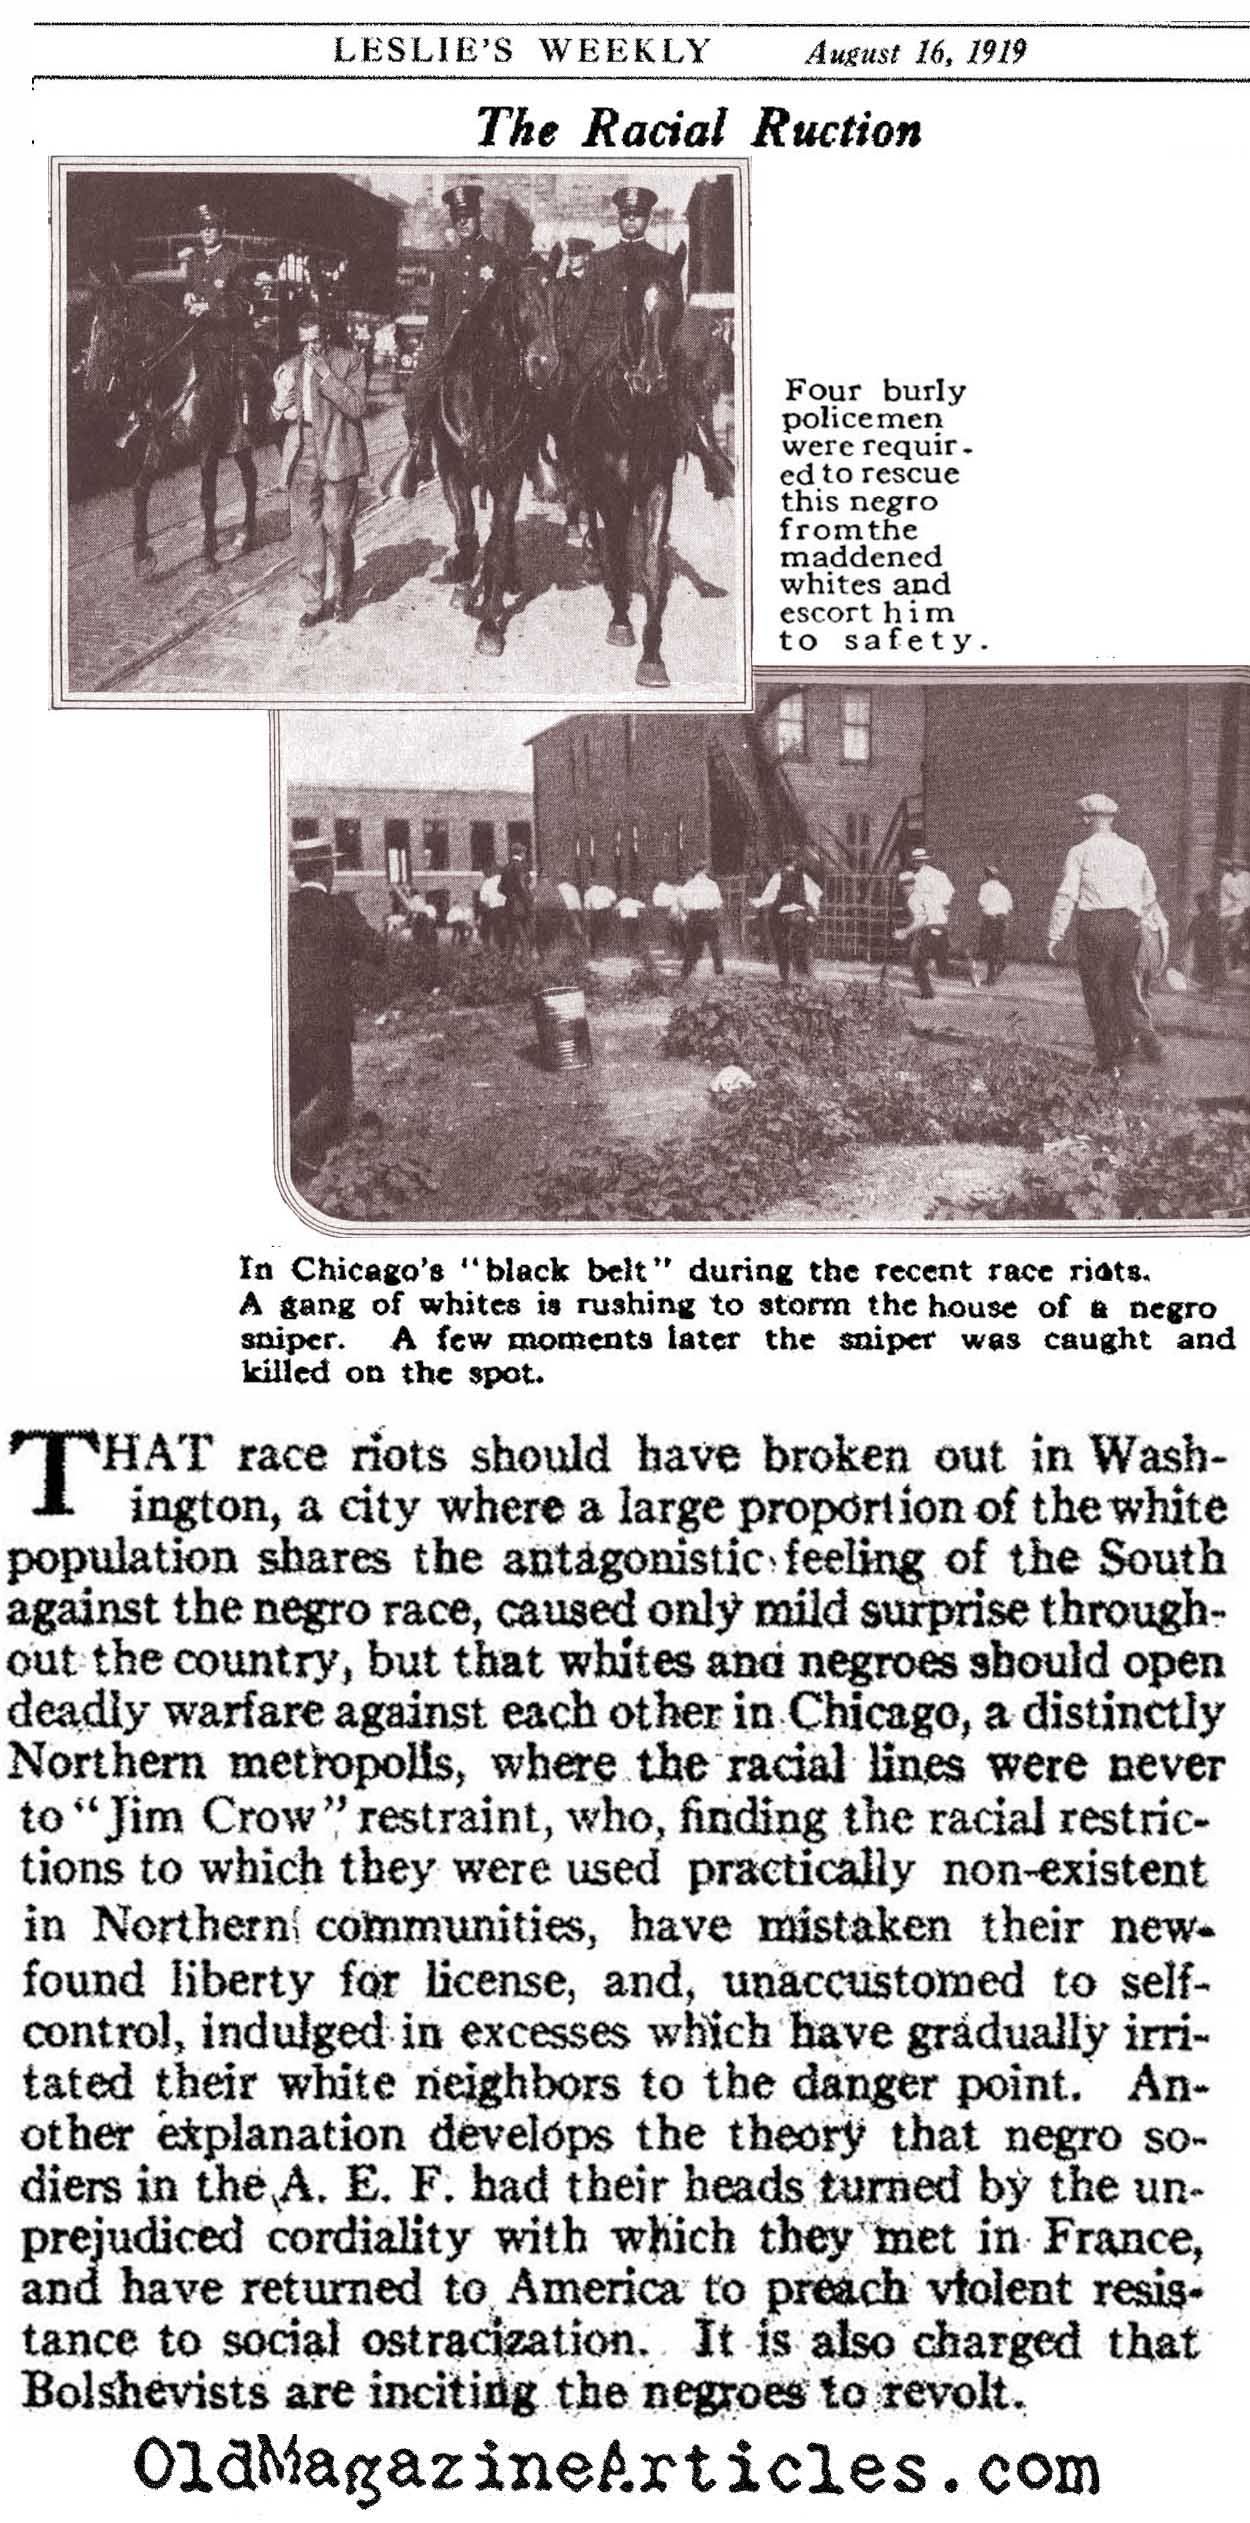 Race Riots in Chicago and Washington (Leslie's Weekly, 1919)